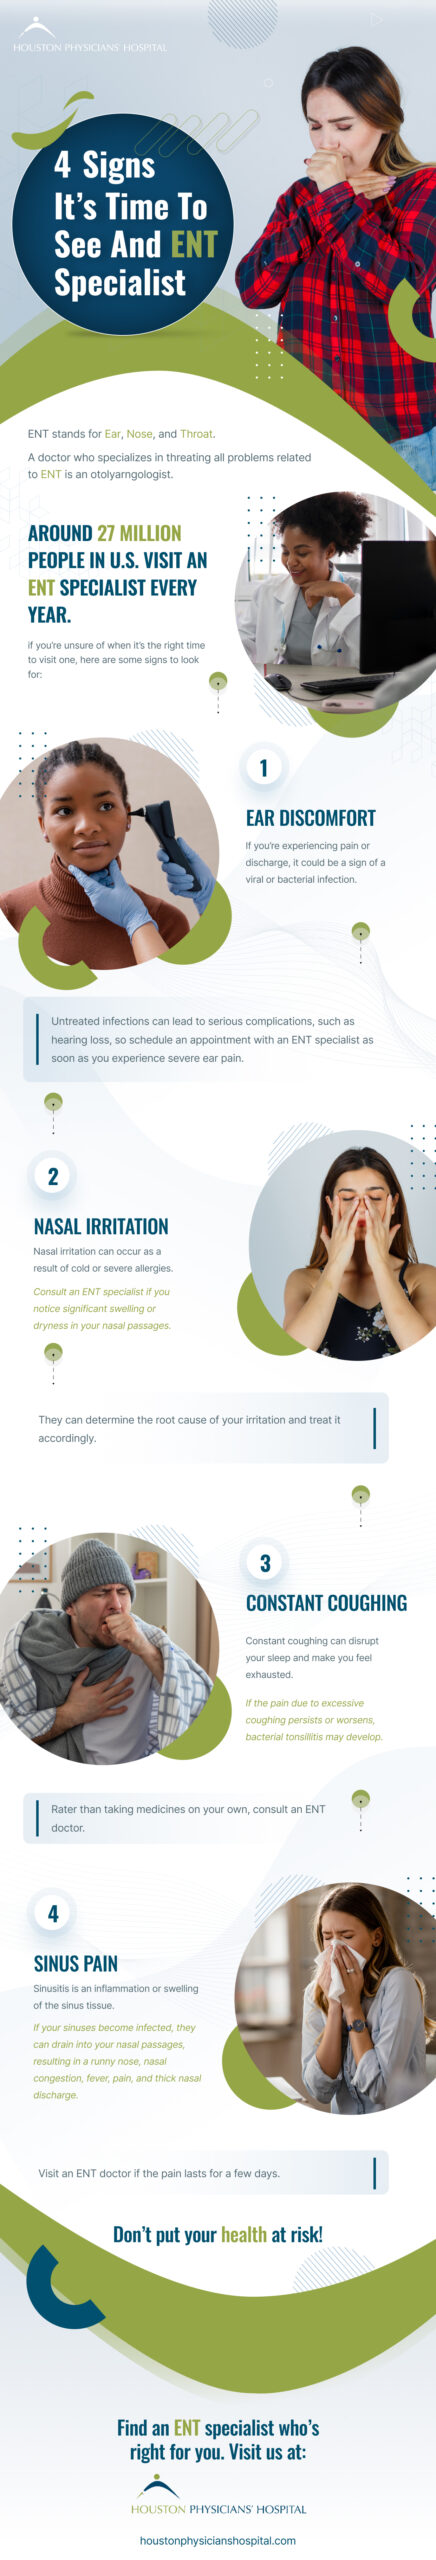 4 Signs To see an ENT Specialist Infograph